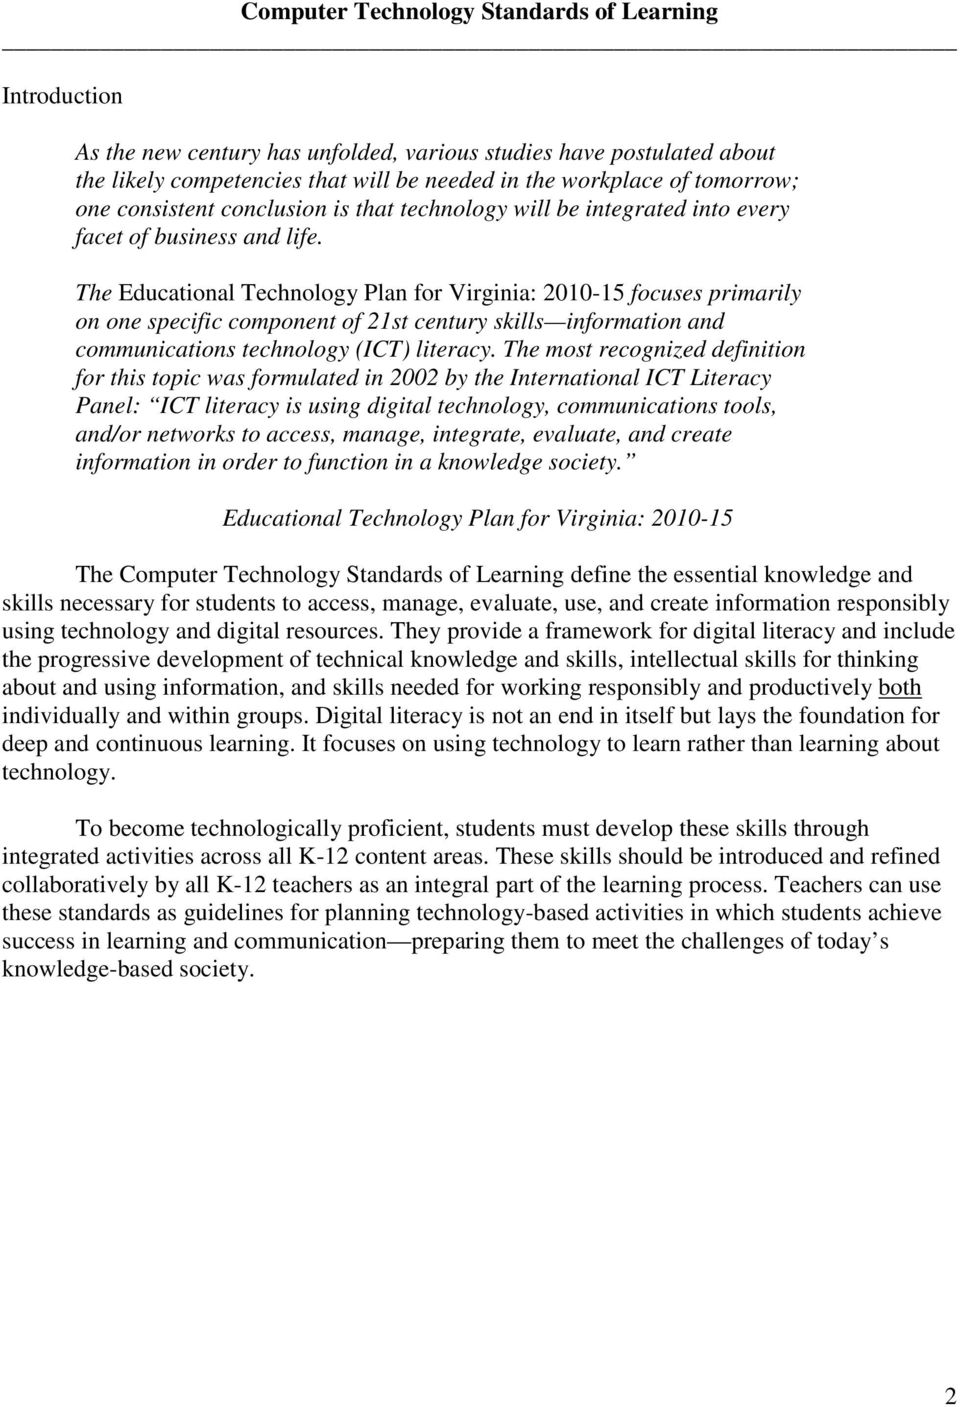 The Educational Technology Plan for Virginia: 2010-15 focuses primarily on one specific component of 21st century skills information and communications technology (ICT) literacy.